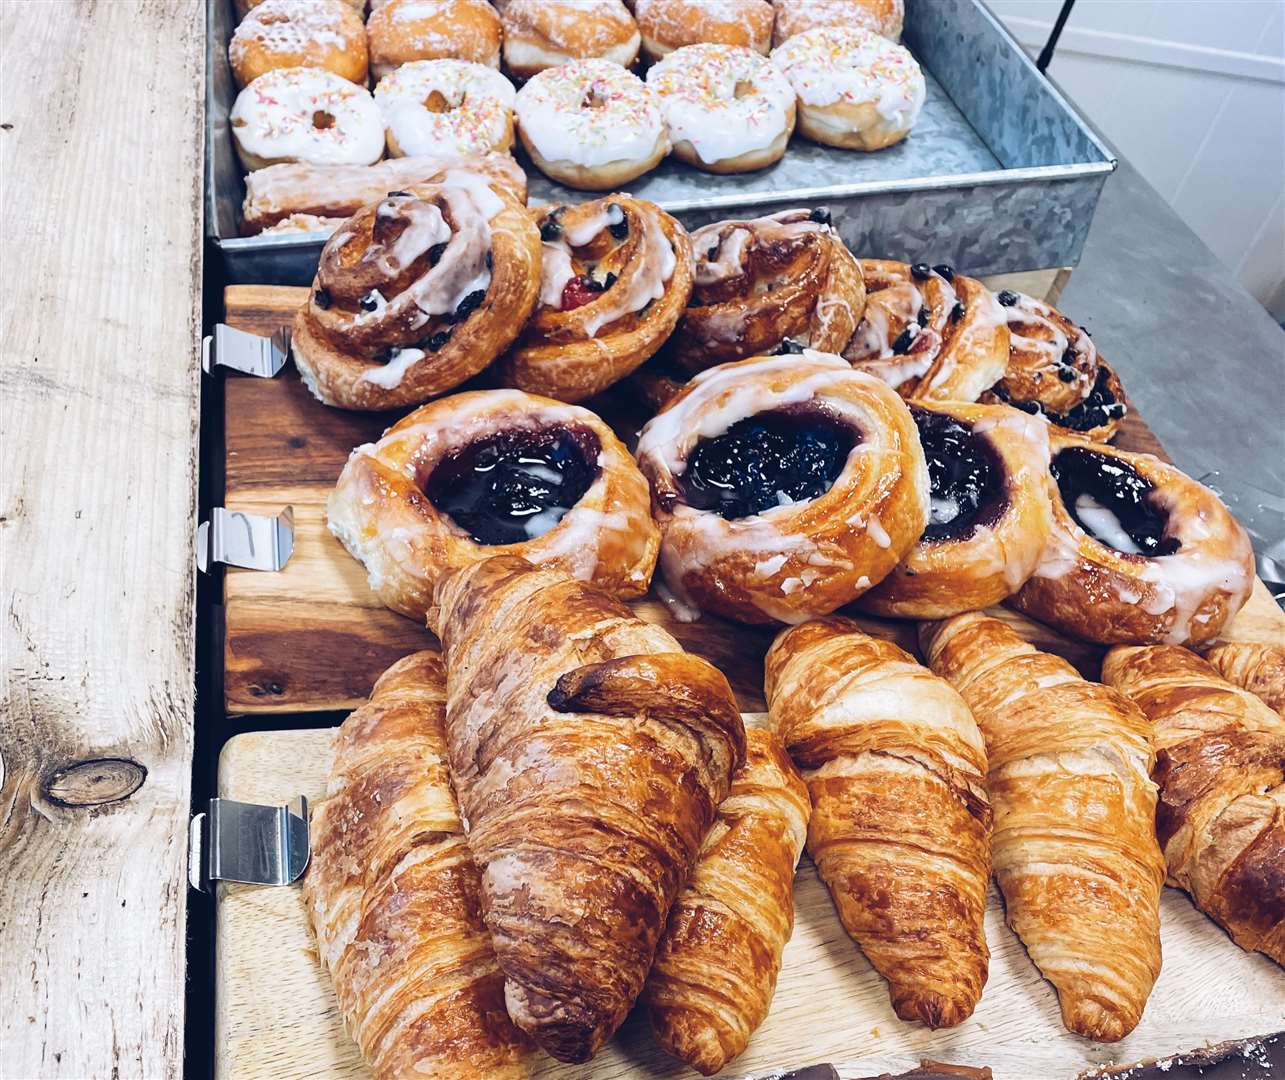 The shop sells coffee with pastries, cakes and sandwiches. Picture: Alex Gonzalez